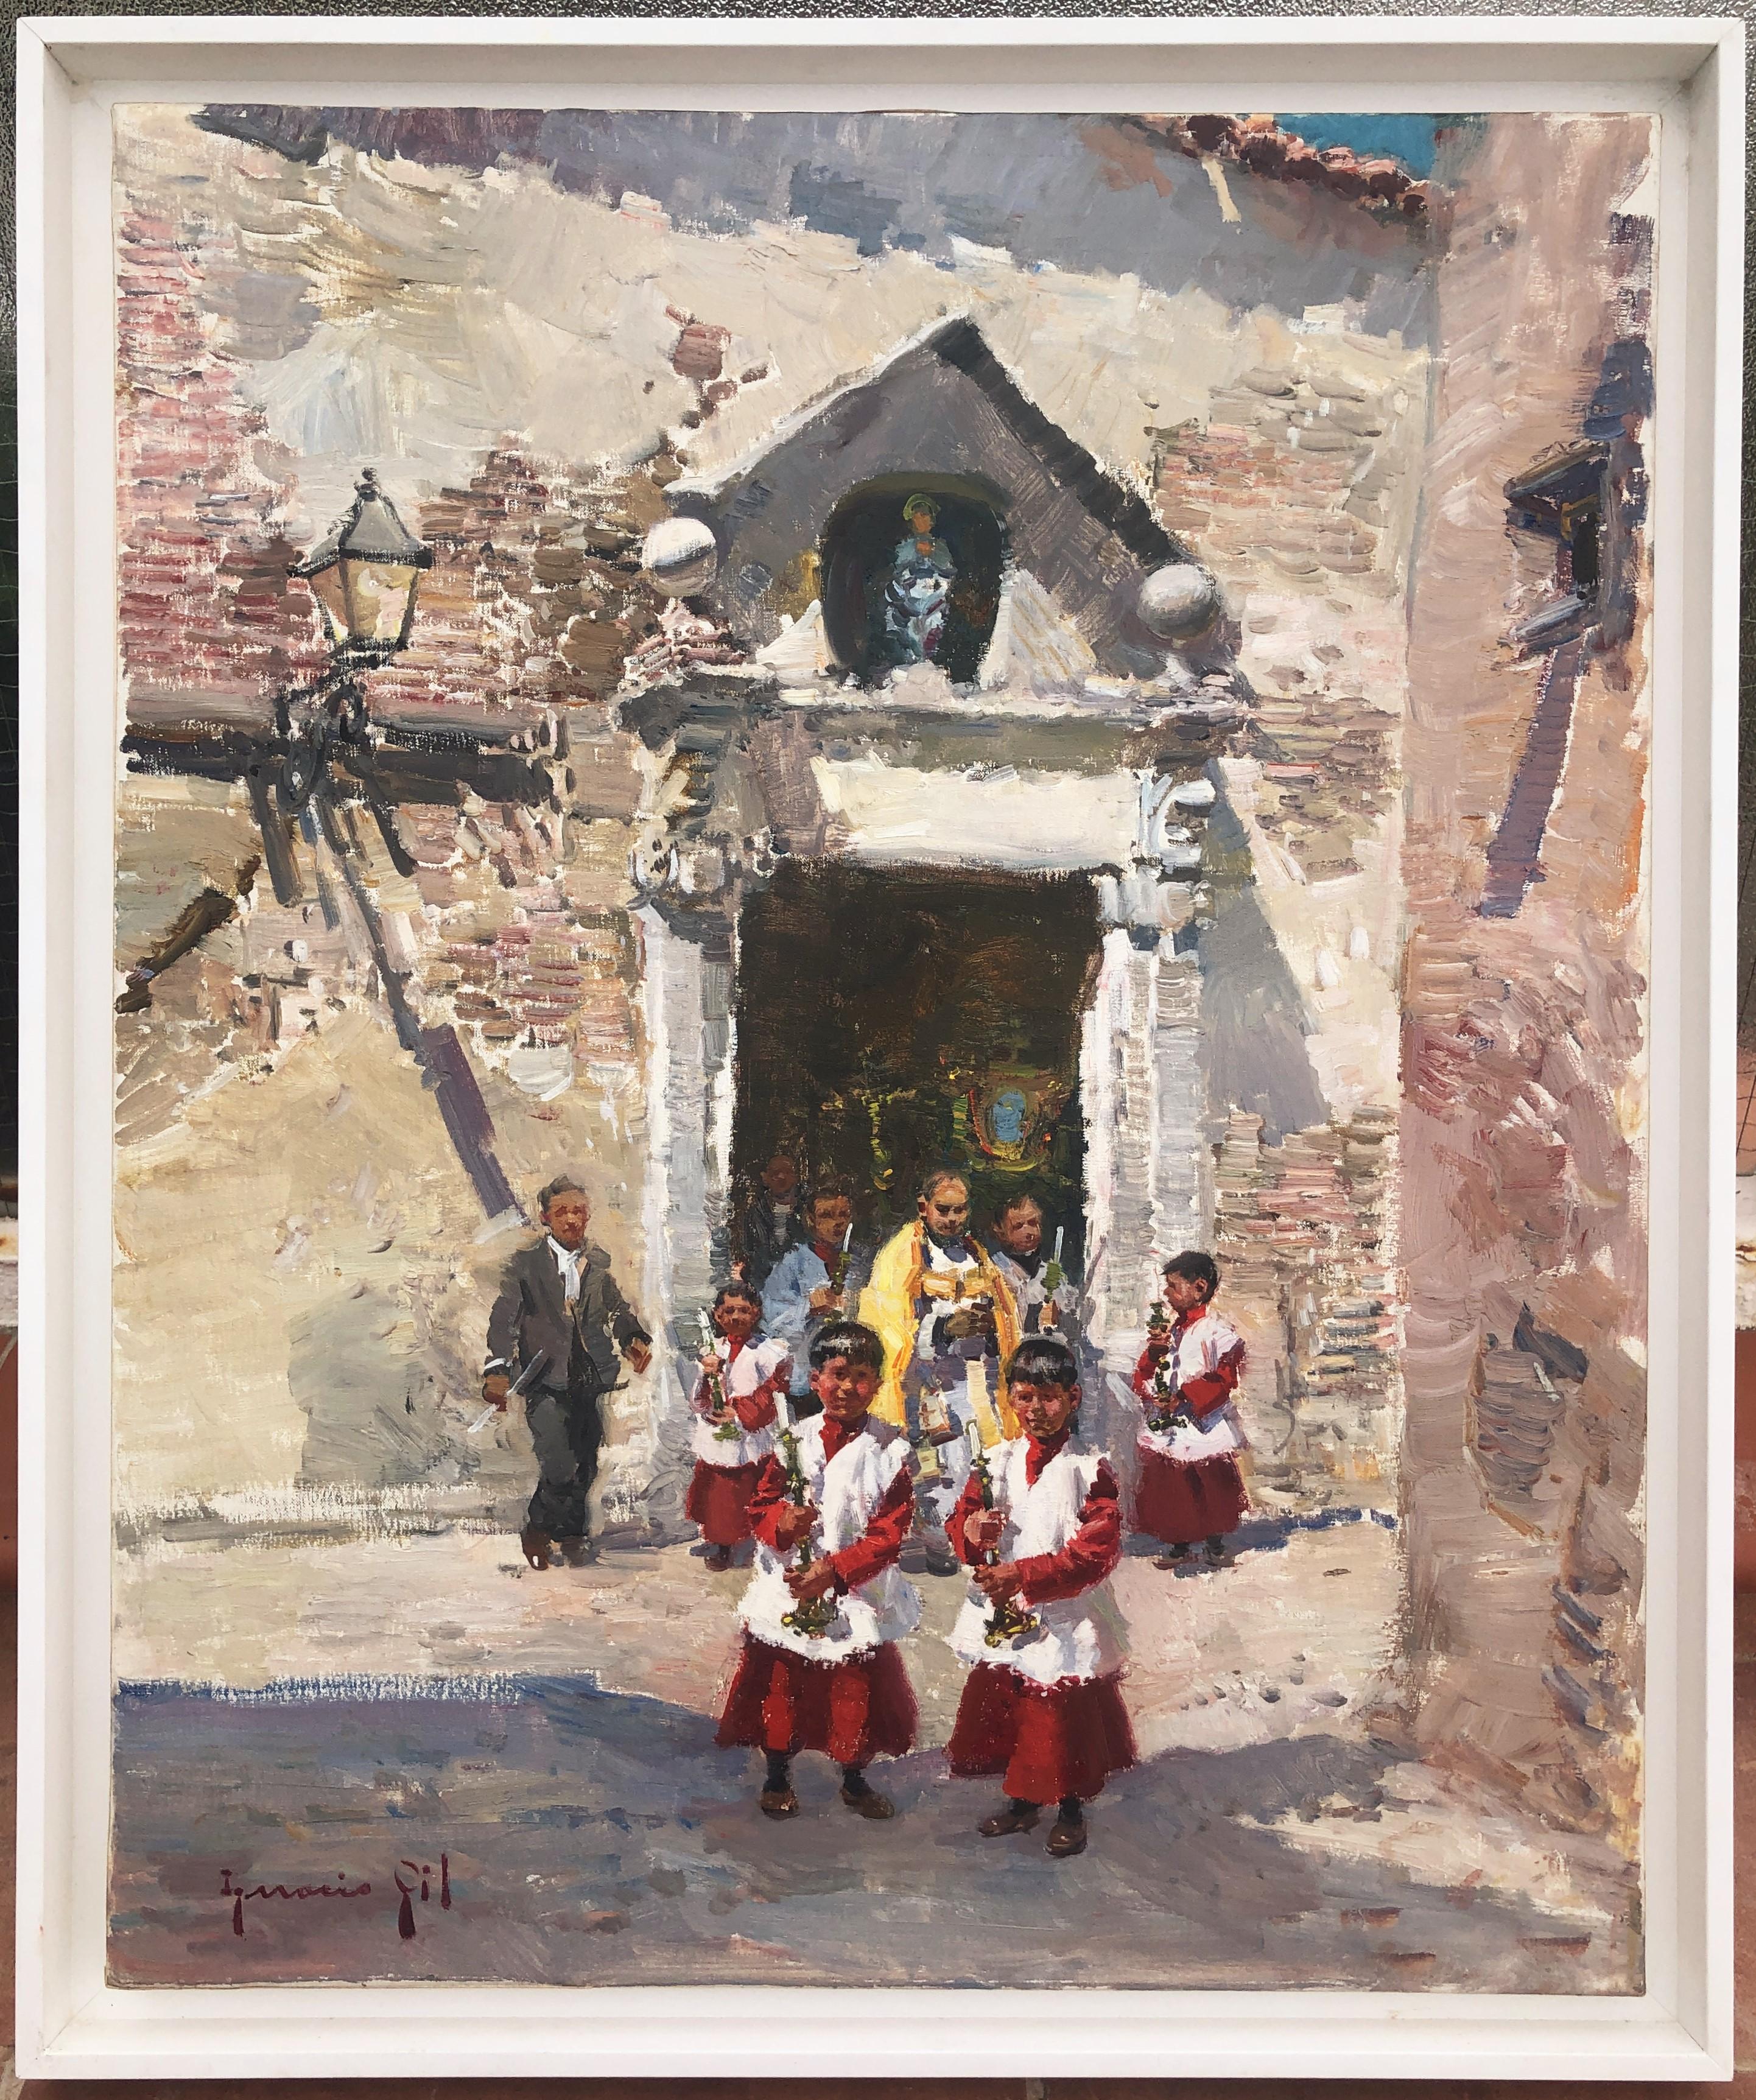 Procession in Ibiza Spain original oil on canvas painting - Painting by Ignacio Gil Sala